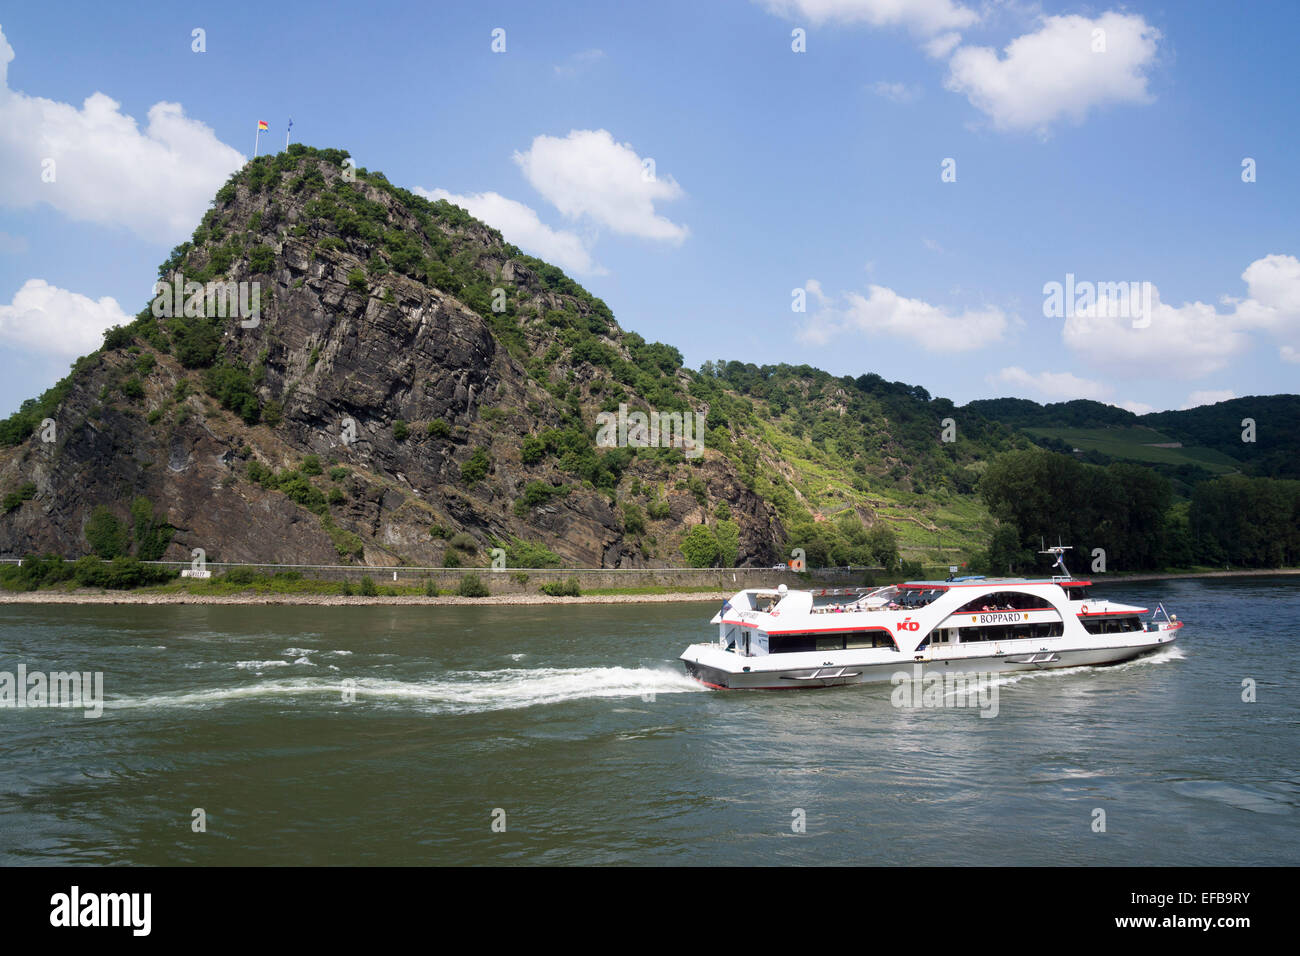 Passenger ship on the Rhine at the Lorelei rock, shale rock in the UNESCO World Heritage Upper Middle Rhine Valley near St. Goar, St. Goar, Germany, Europe - 2014 Stock Photo